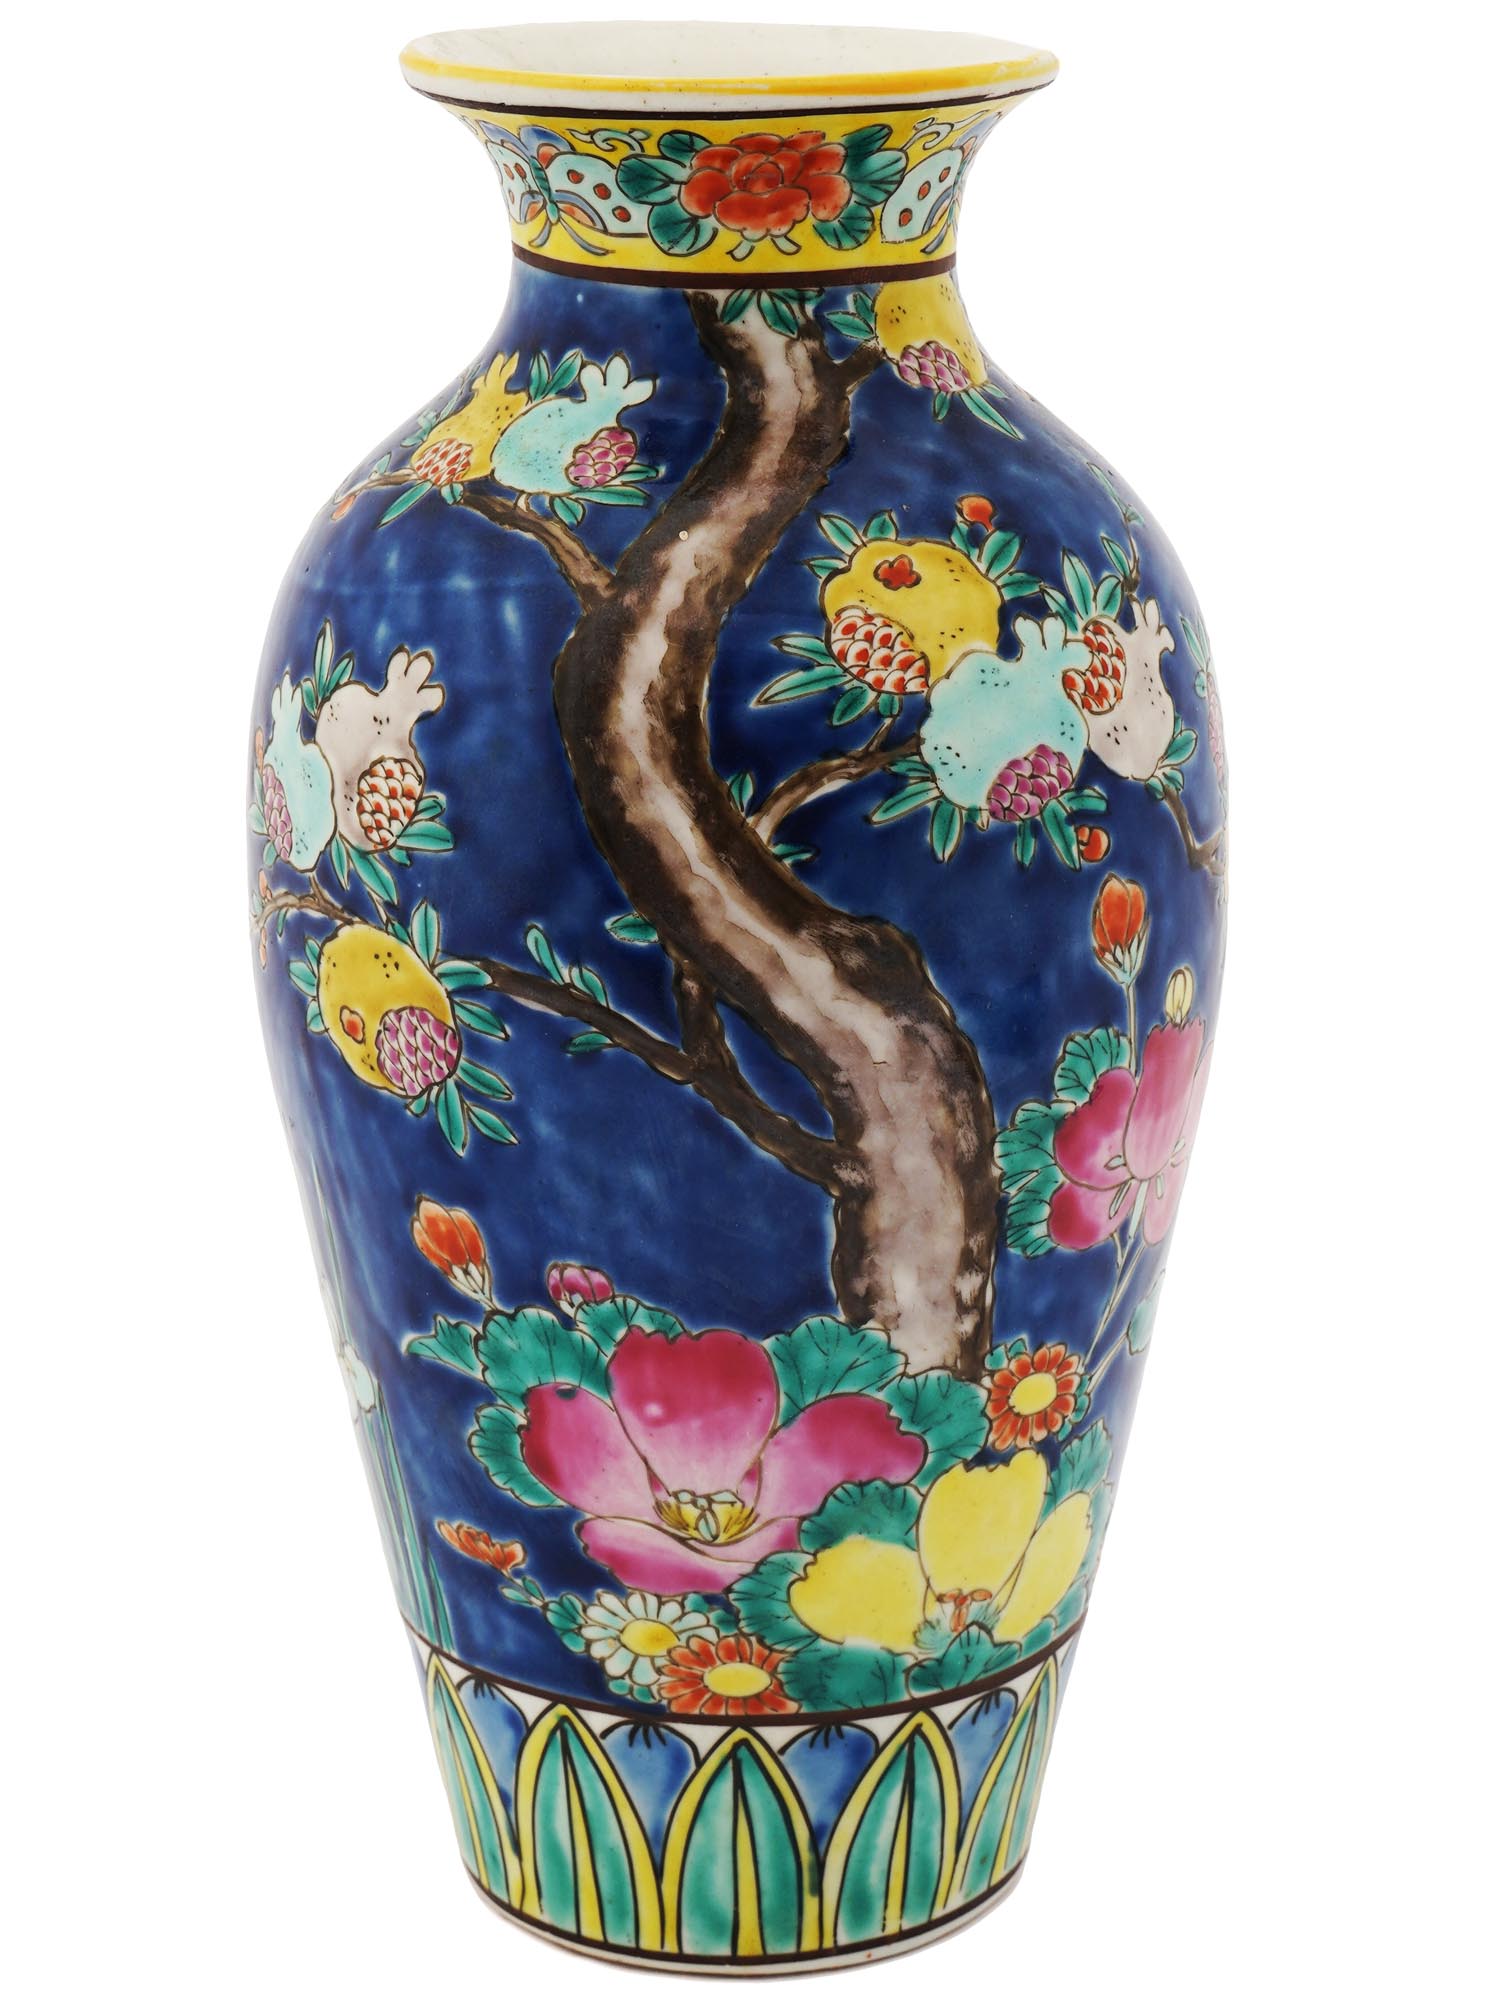 ANTIQUE CHINESE QING HAND PAINTED PORCELAIN VASE PIC-0